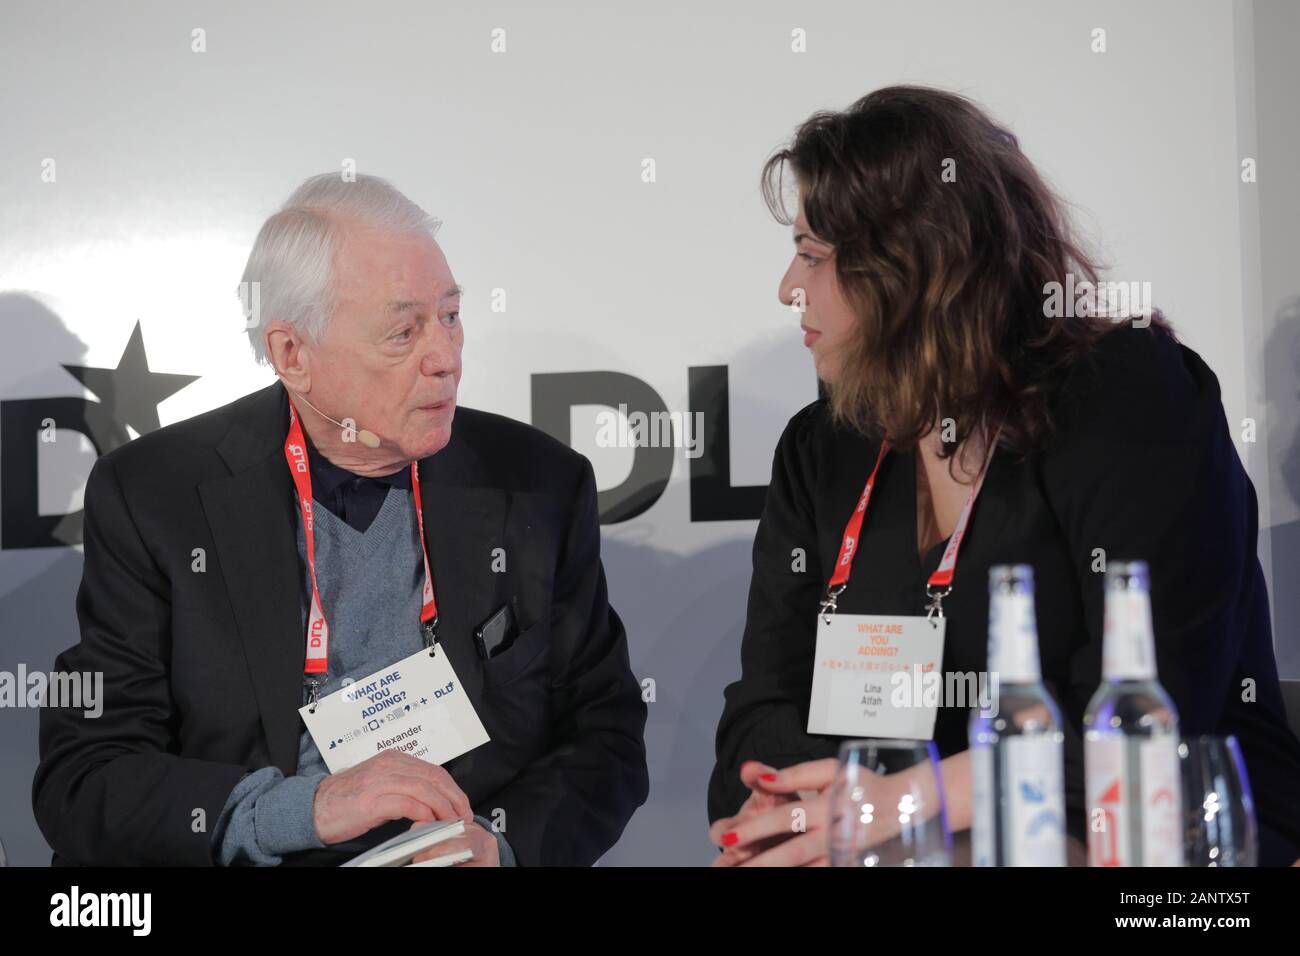 19 January 2020, Bavaria, Munich: Alexander Kluge (dctp GmbH), Lina Atfah (Syrian poet) discuss during a panel at DLD Munich Conference 2020, Europe's big innovation conference, Alte Kongresshalle, Munich, January 18-20, 2020 Picture Alliance for DLD / Hubert Burda Media | usage worldwide Stock Photo